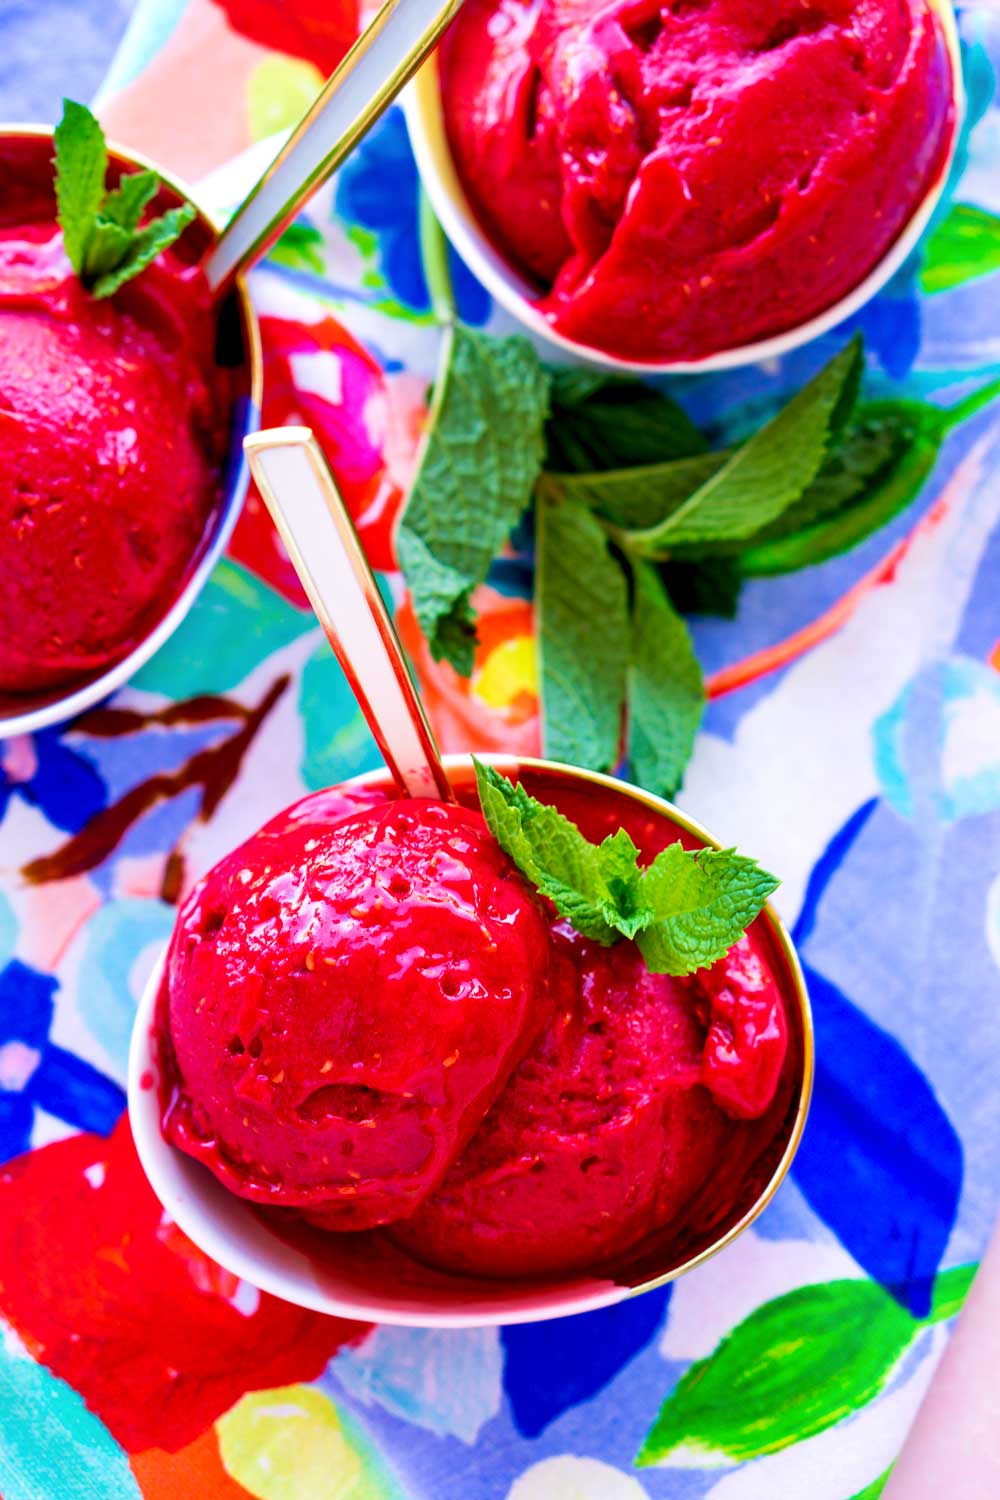 The perfect bowl of Raspberry Sorbet.